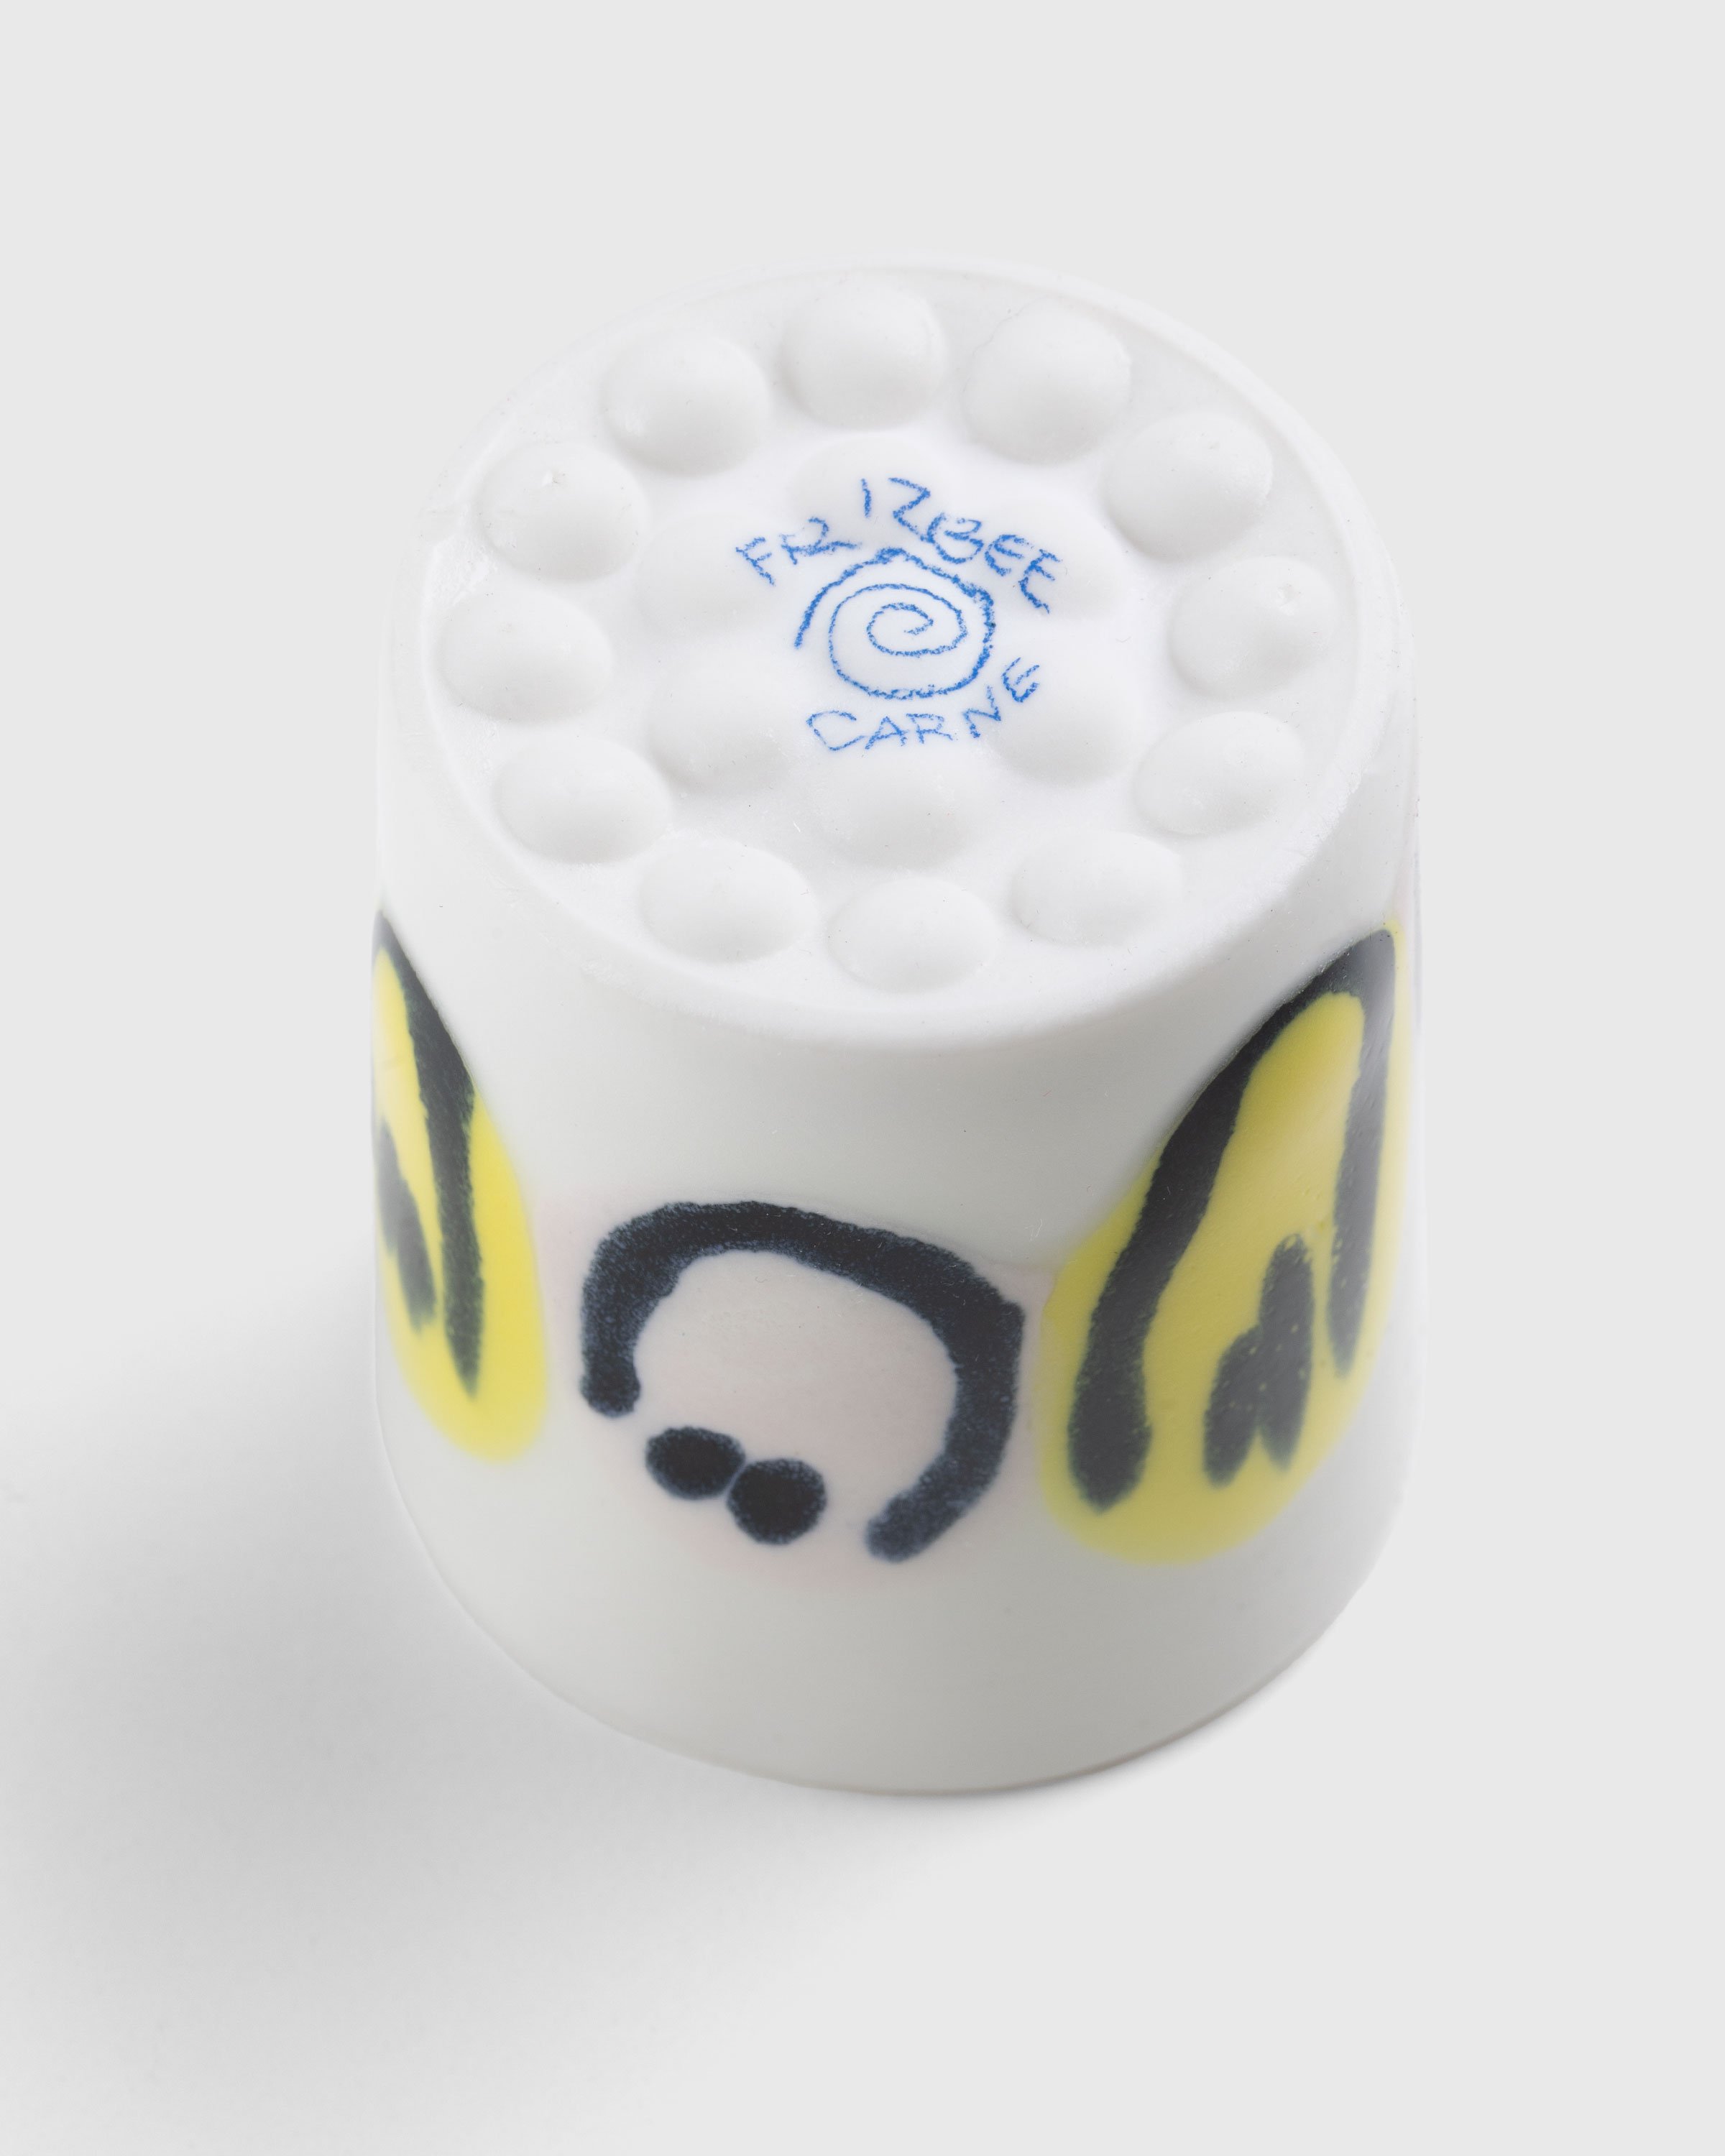 Carne Bollente x Frizbee Ceramics - Ride Together Cup White - Lifestyle - Multi - Image 3